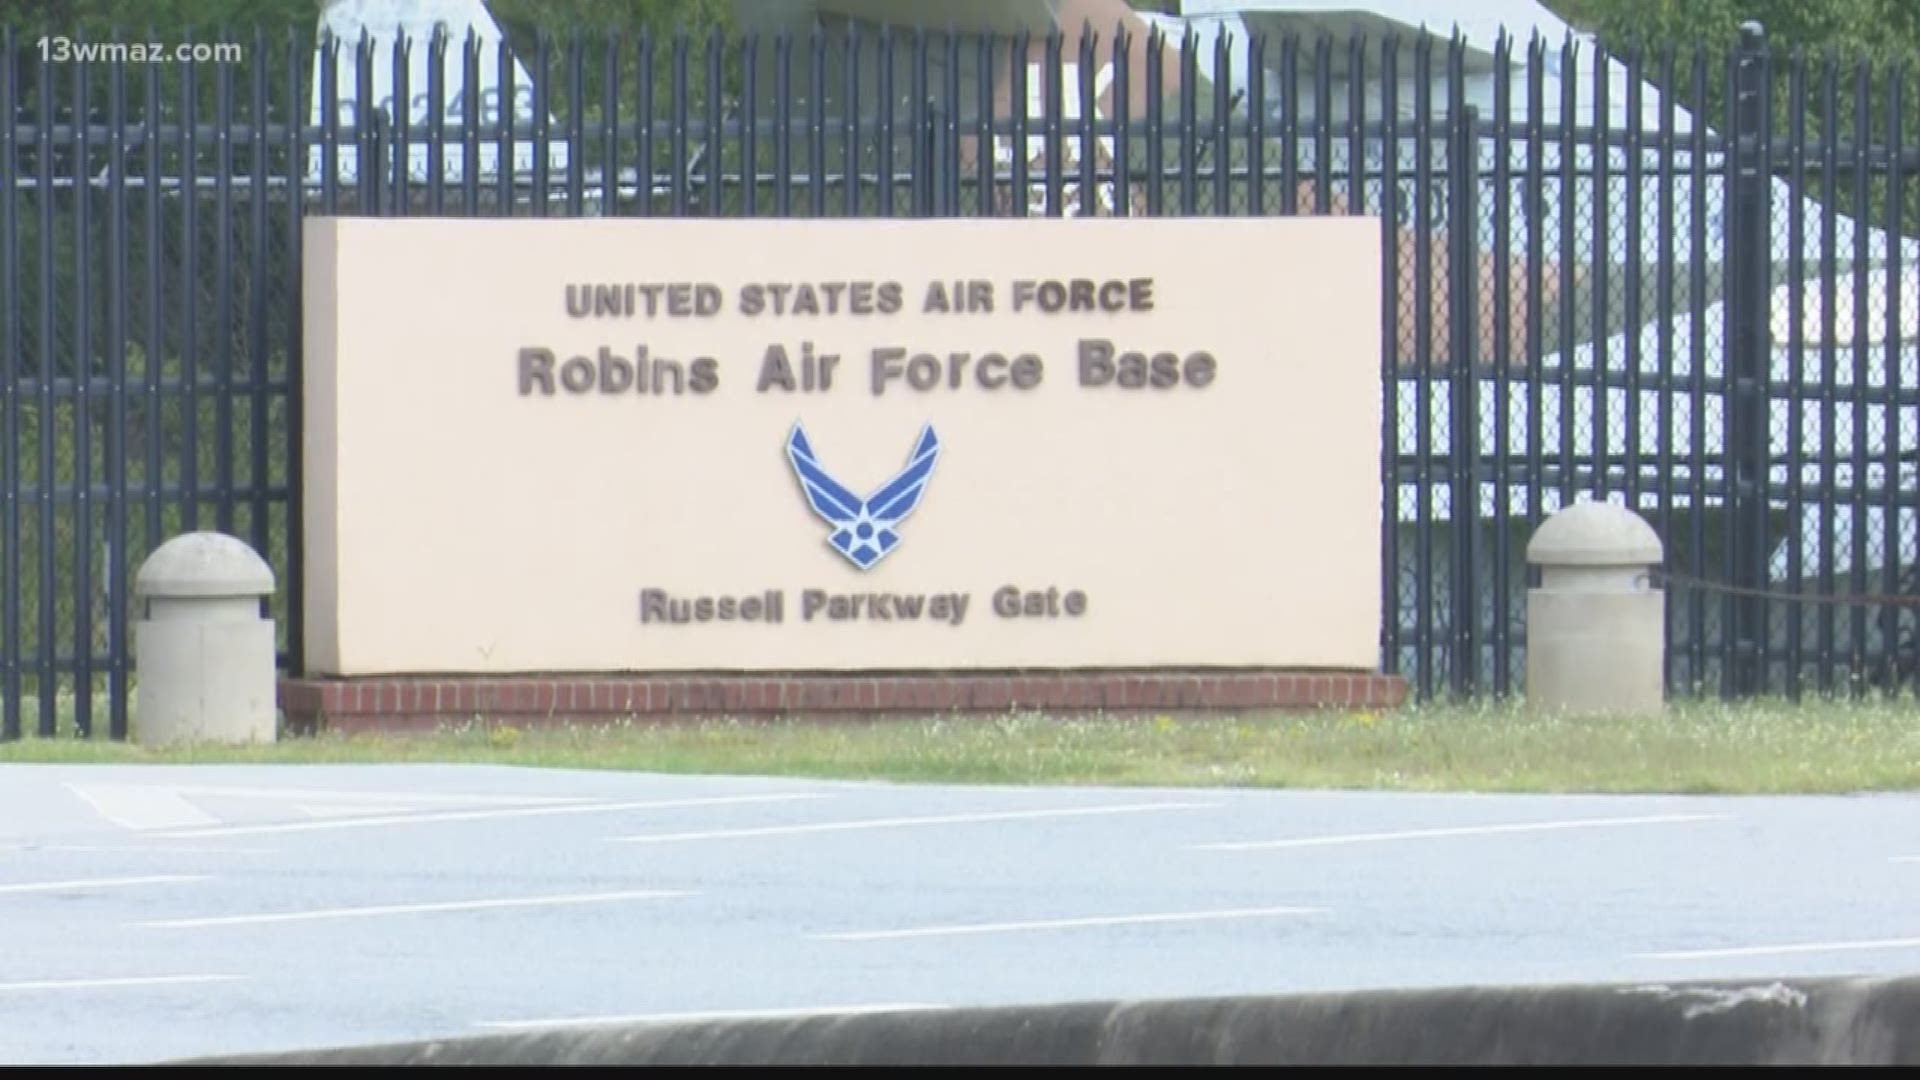 Robins AFB officials say the three men drove through the gate after bypassing security and crashed into a barrier